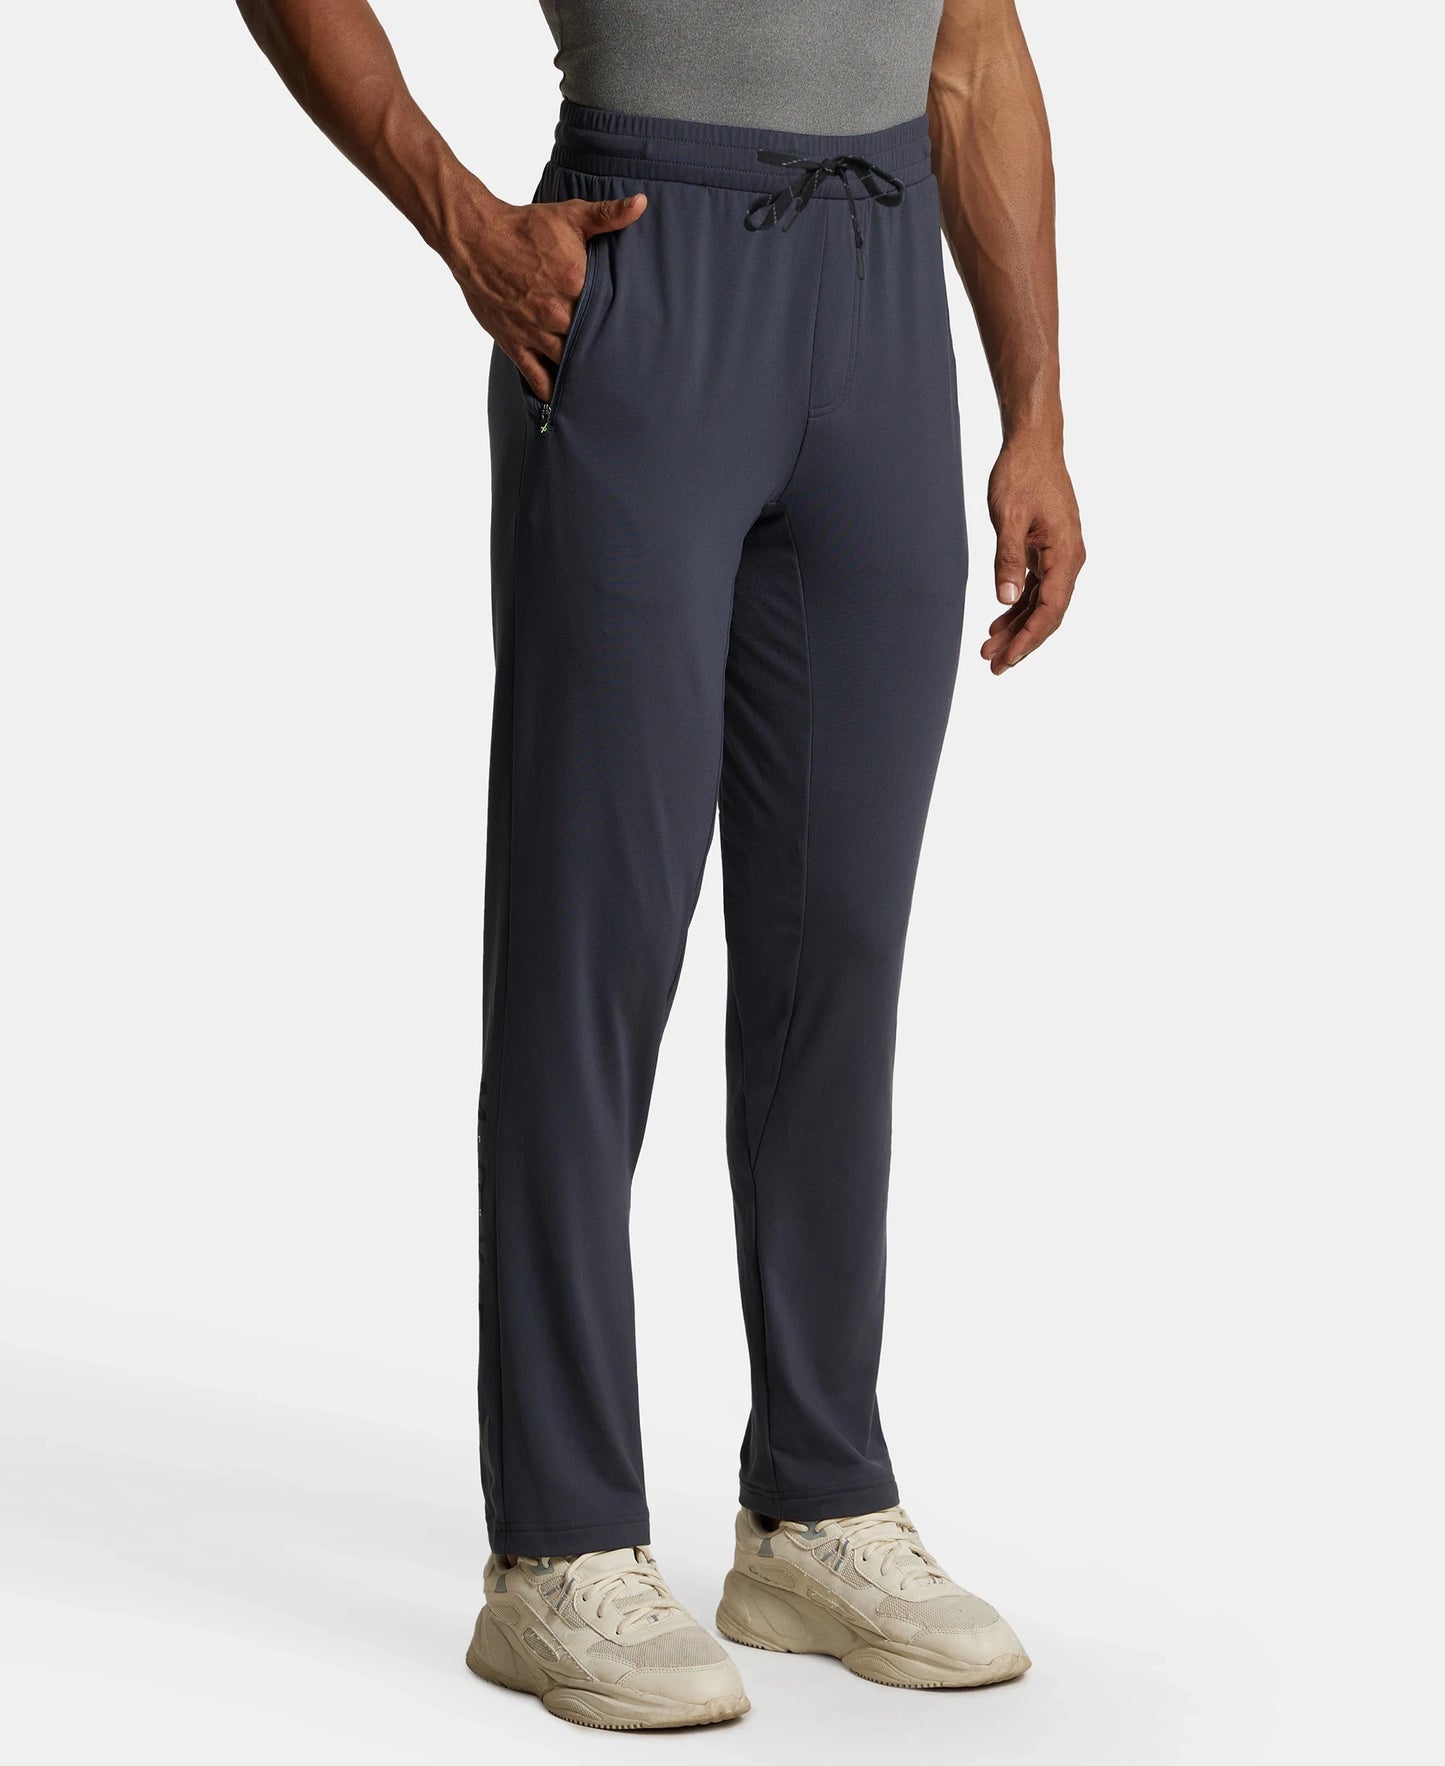 Soft Touch Microfiber Elastane Stretch Trackpant with Side Pockets and StayFresh Treatment - Graphite